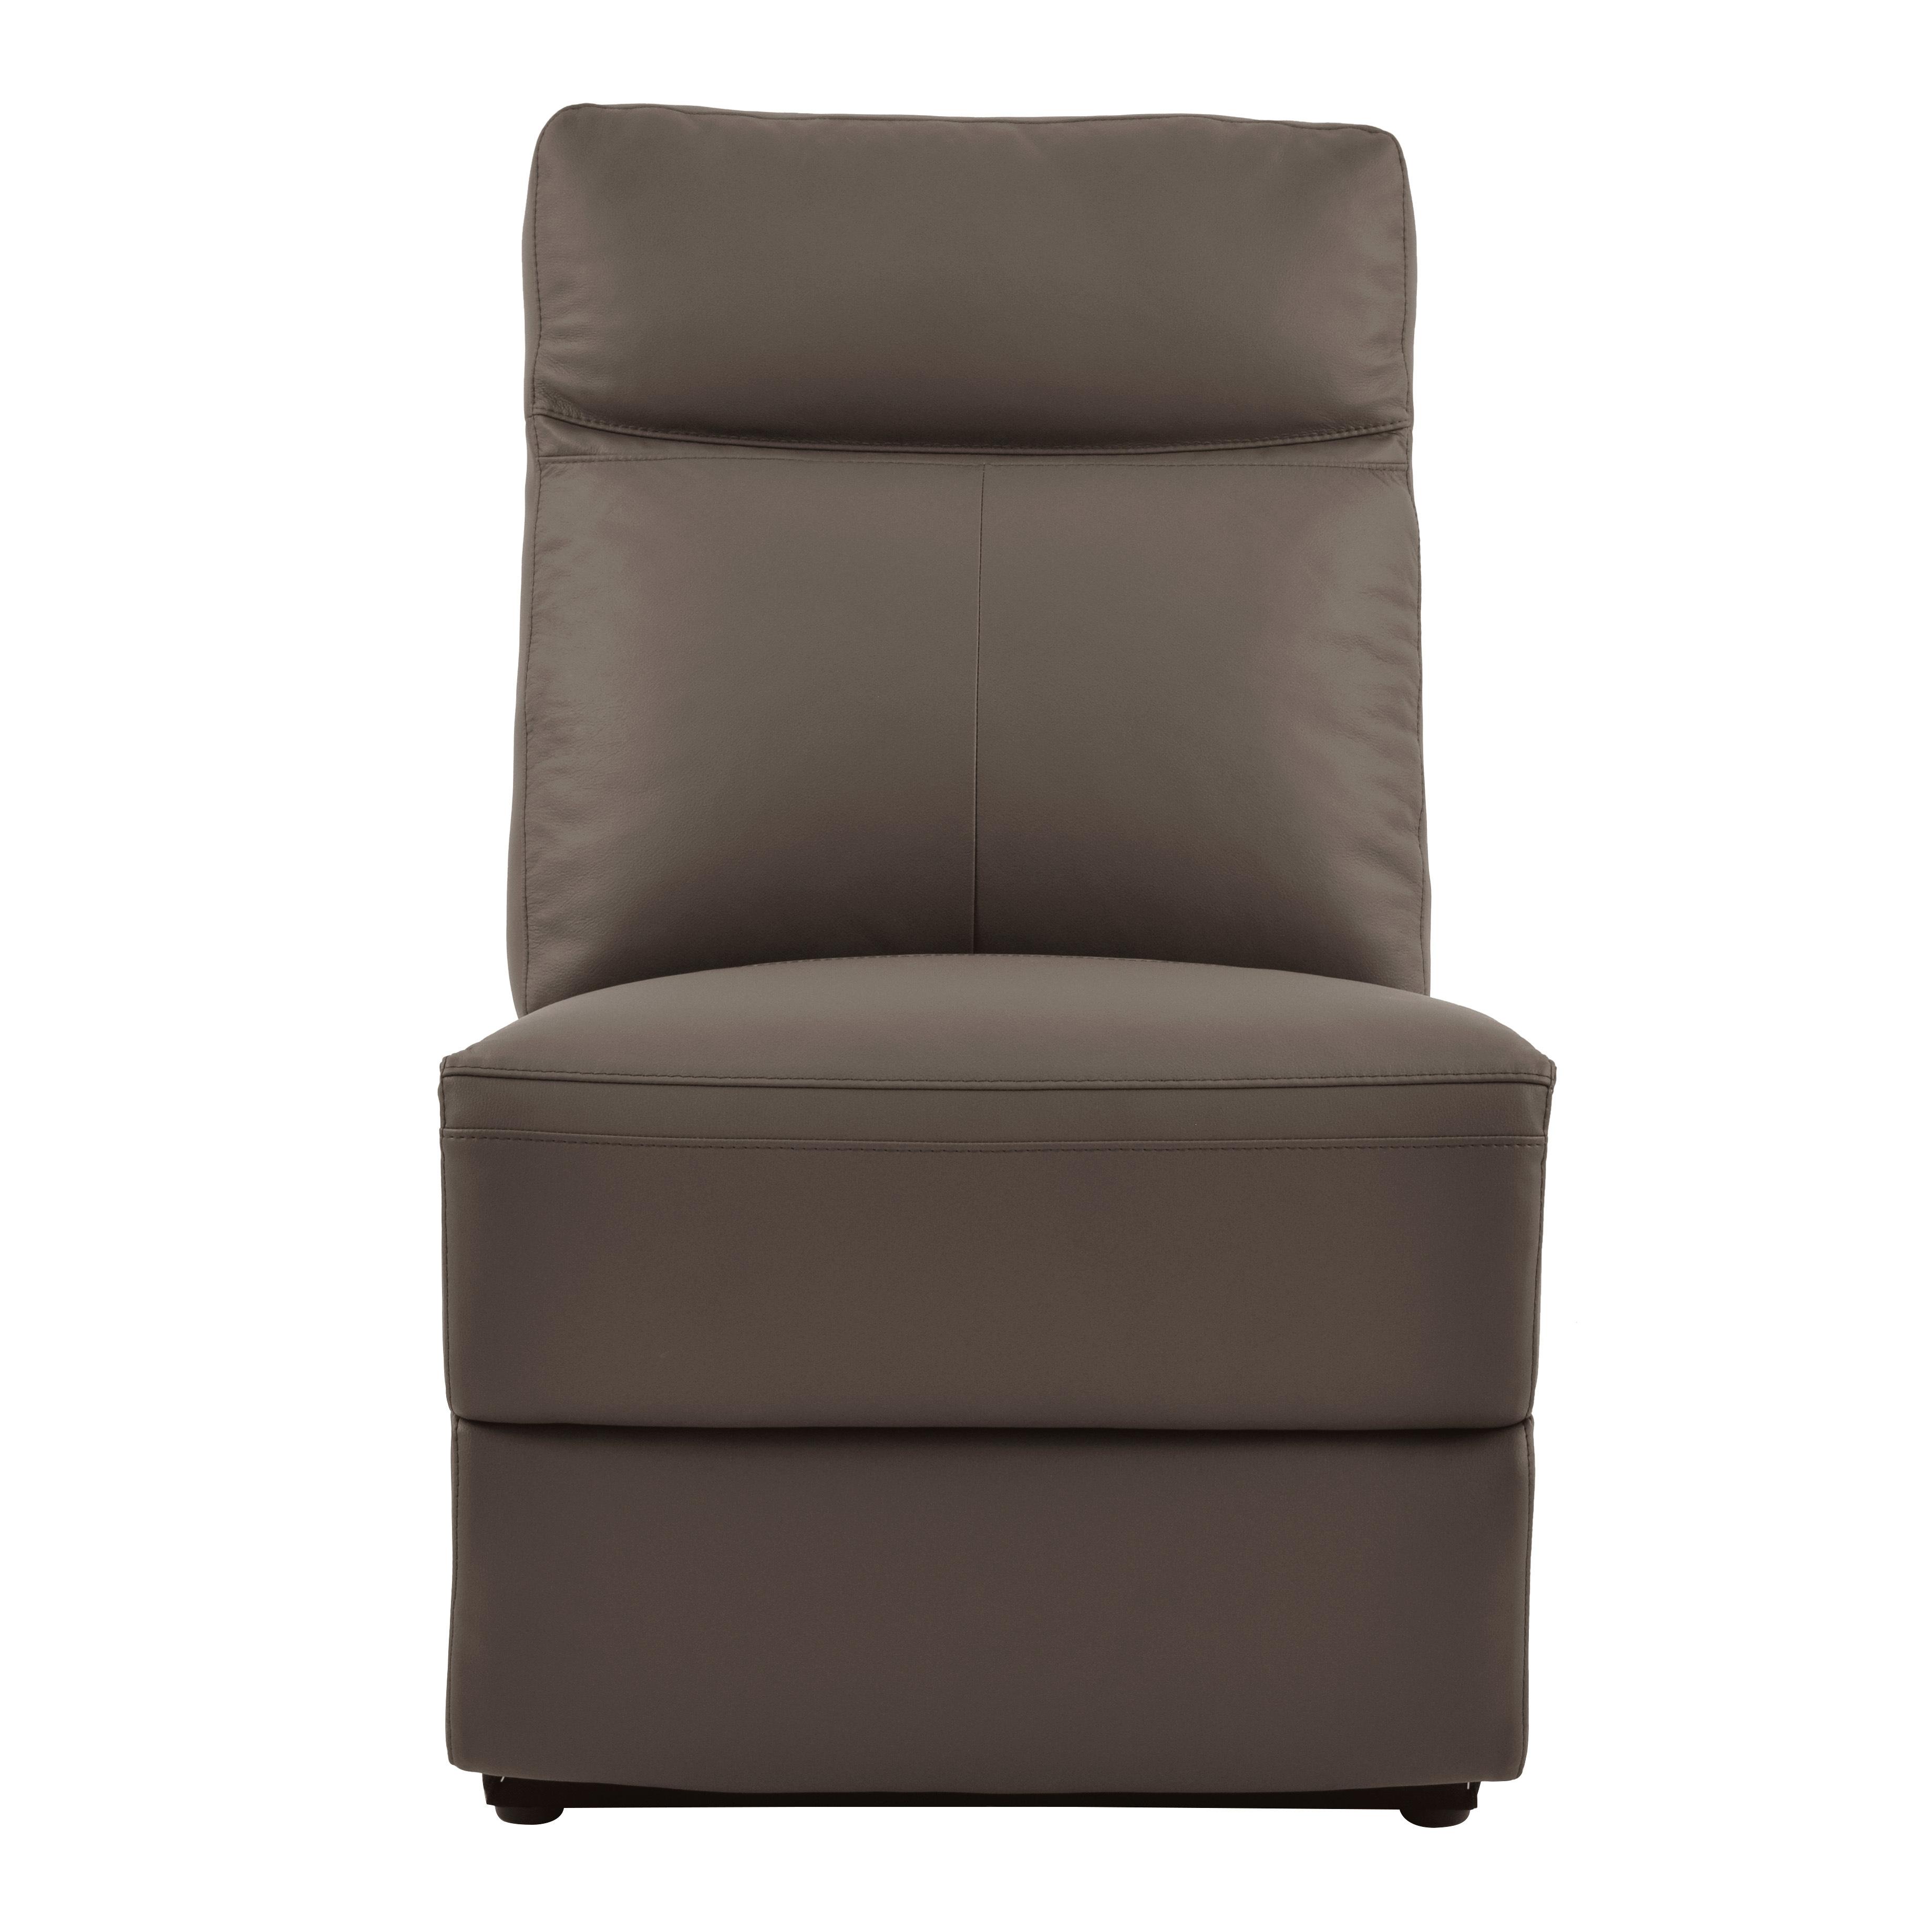 Contemporary Power Armless Reclining Chair 8308-ARPW Olympia 8308-ARPW in Brown Top grain leather